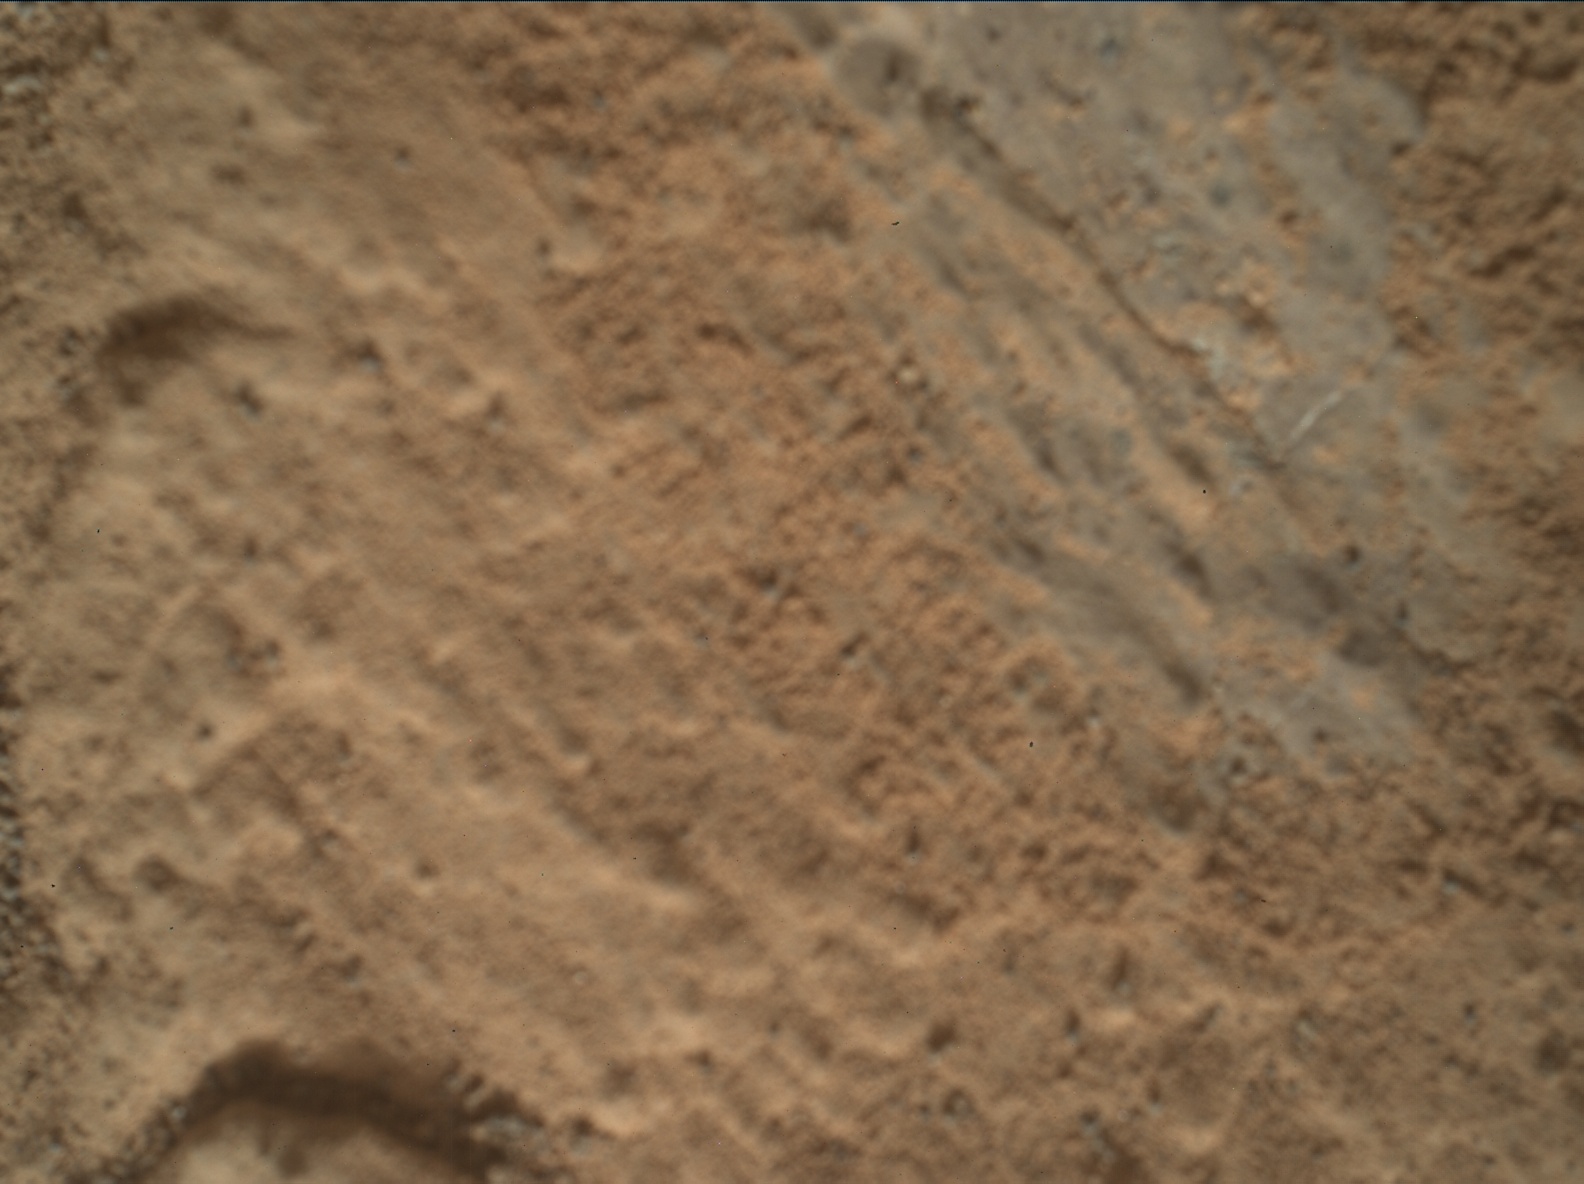 Nasa's Mars rover Curiosity acquired this image using its Mars Hand Lens Imager (MAHLI) on Sol 2656